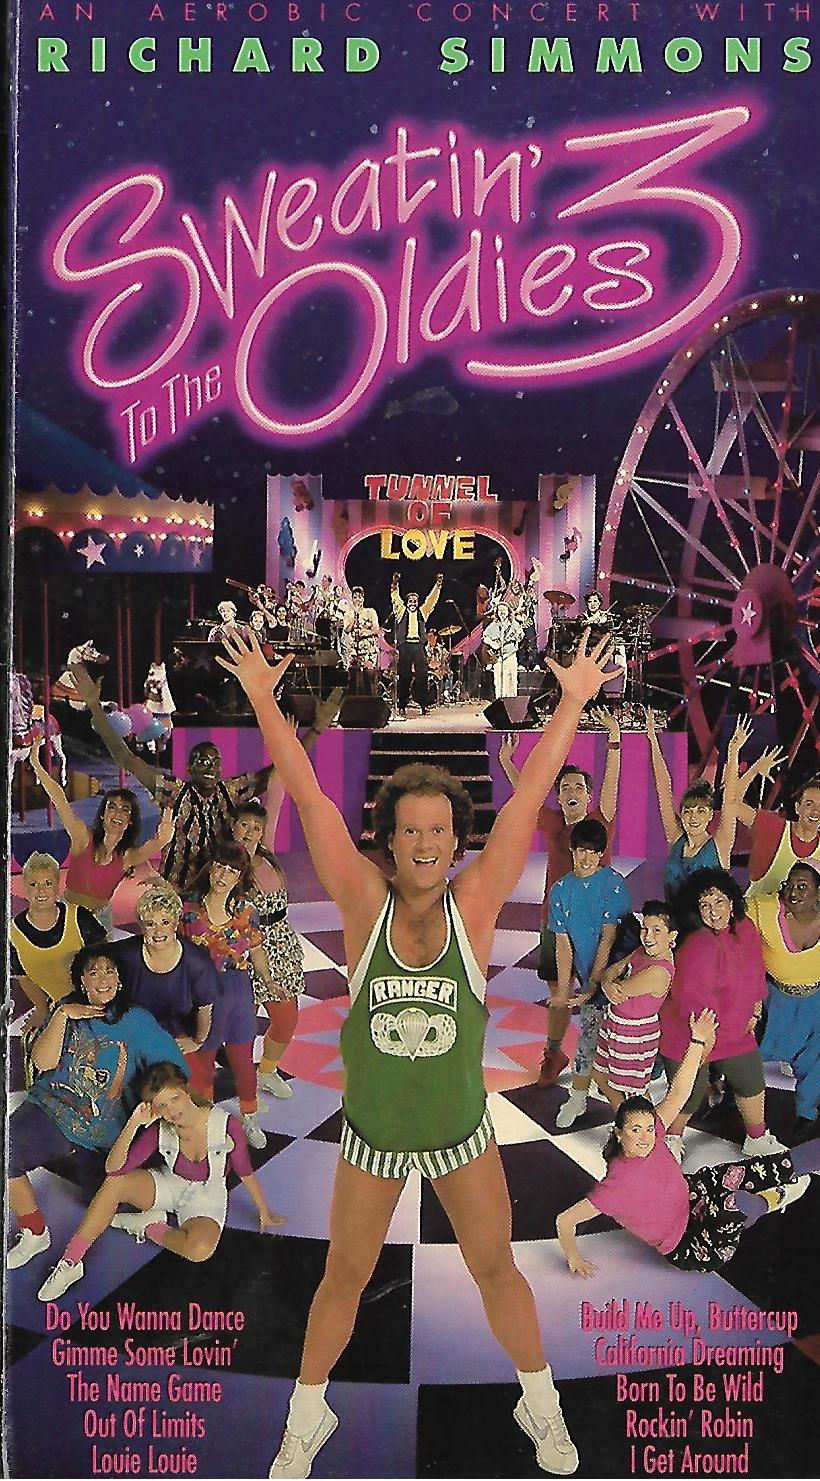 vhs-tape-richard-simmons-sweatin-to-the-oldies-truth-sincerity